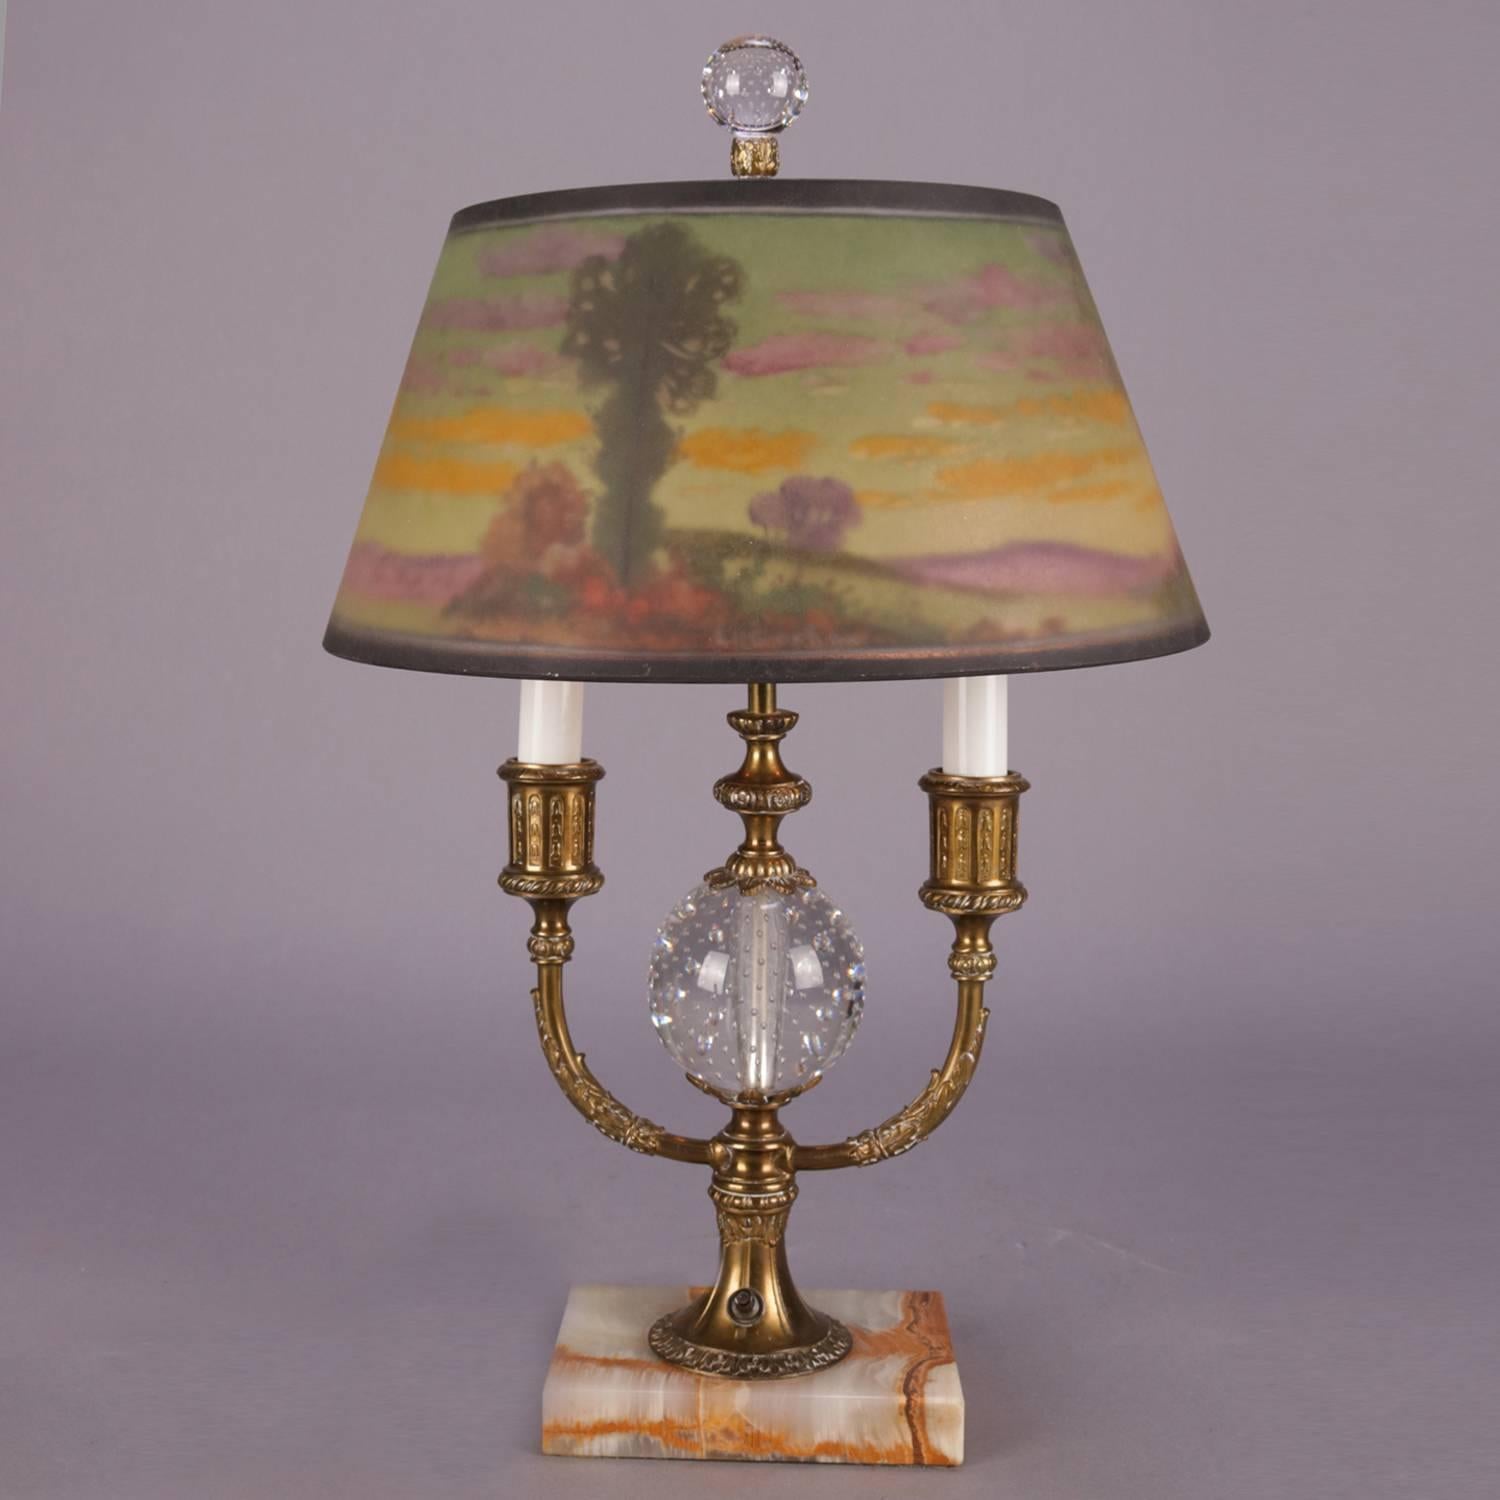 Cast Pairpoint Reverse Painted Directorie Table Lamp, Artist Signed L.H. Gorham